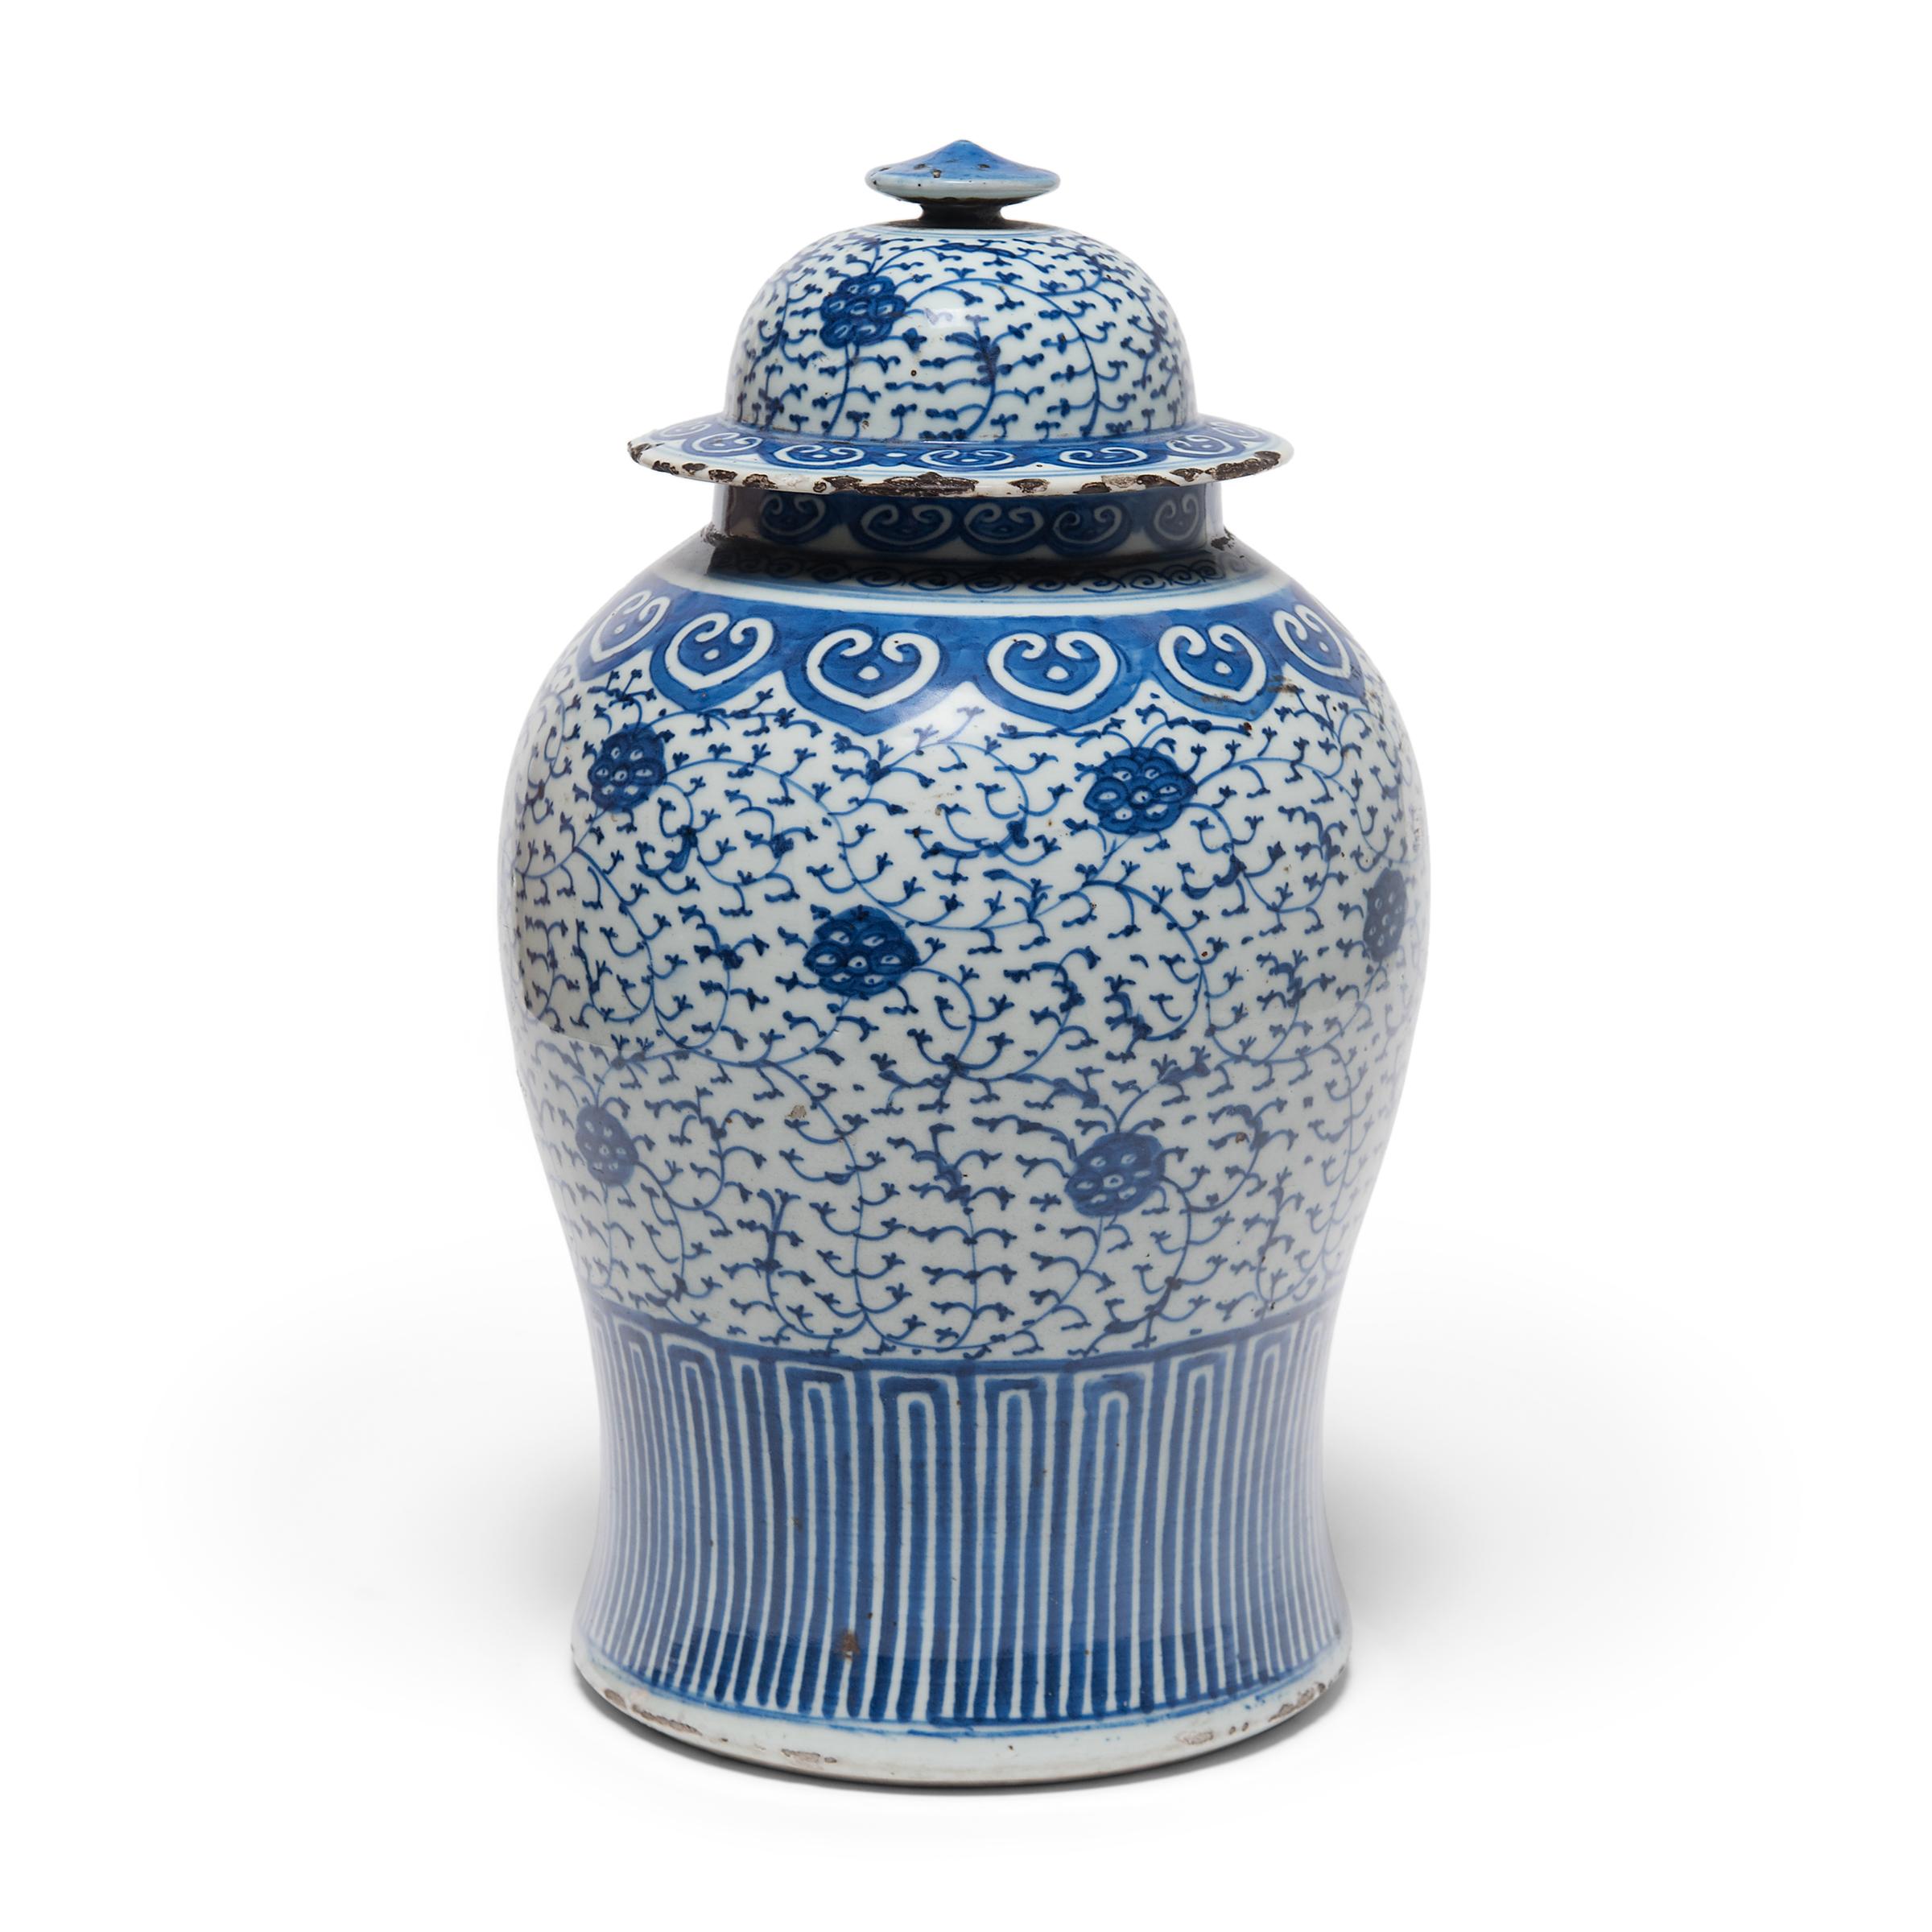 First developed during the Tang dynasty, Chinese blue-and-white porcelain has been treasured by collectors for centuries. Renowned for its painterly decoration and the beautiful contrast of rich blue on white, this unique ceramic style begins with a